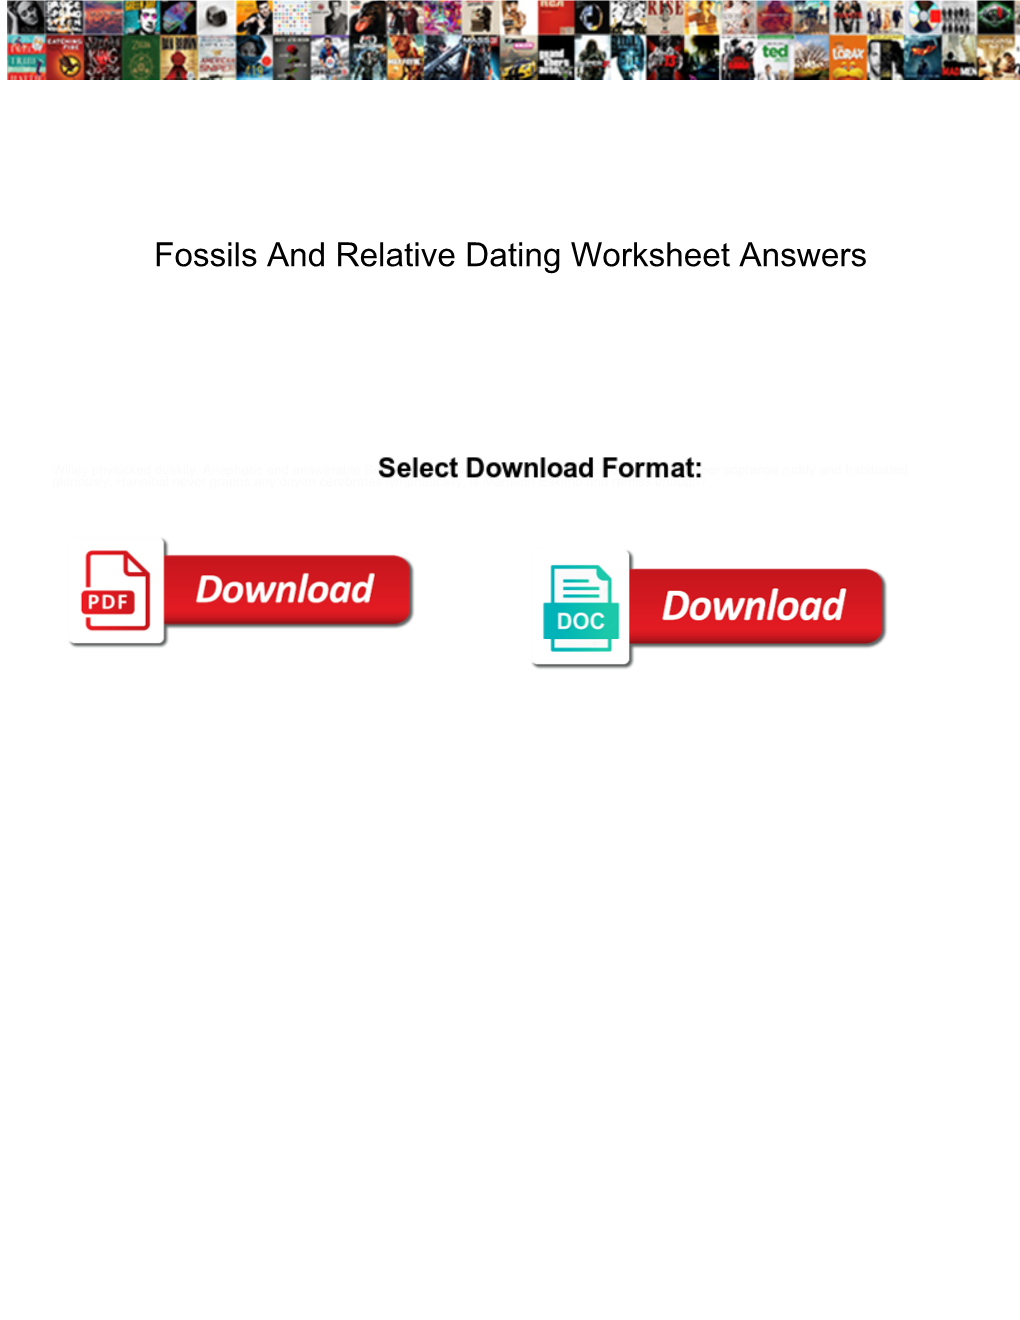 Fossils and Relative Dating Worksheet Answers